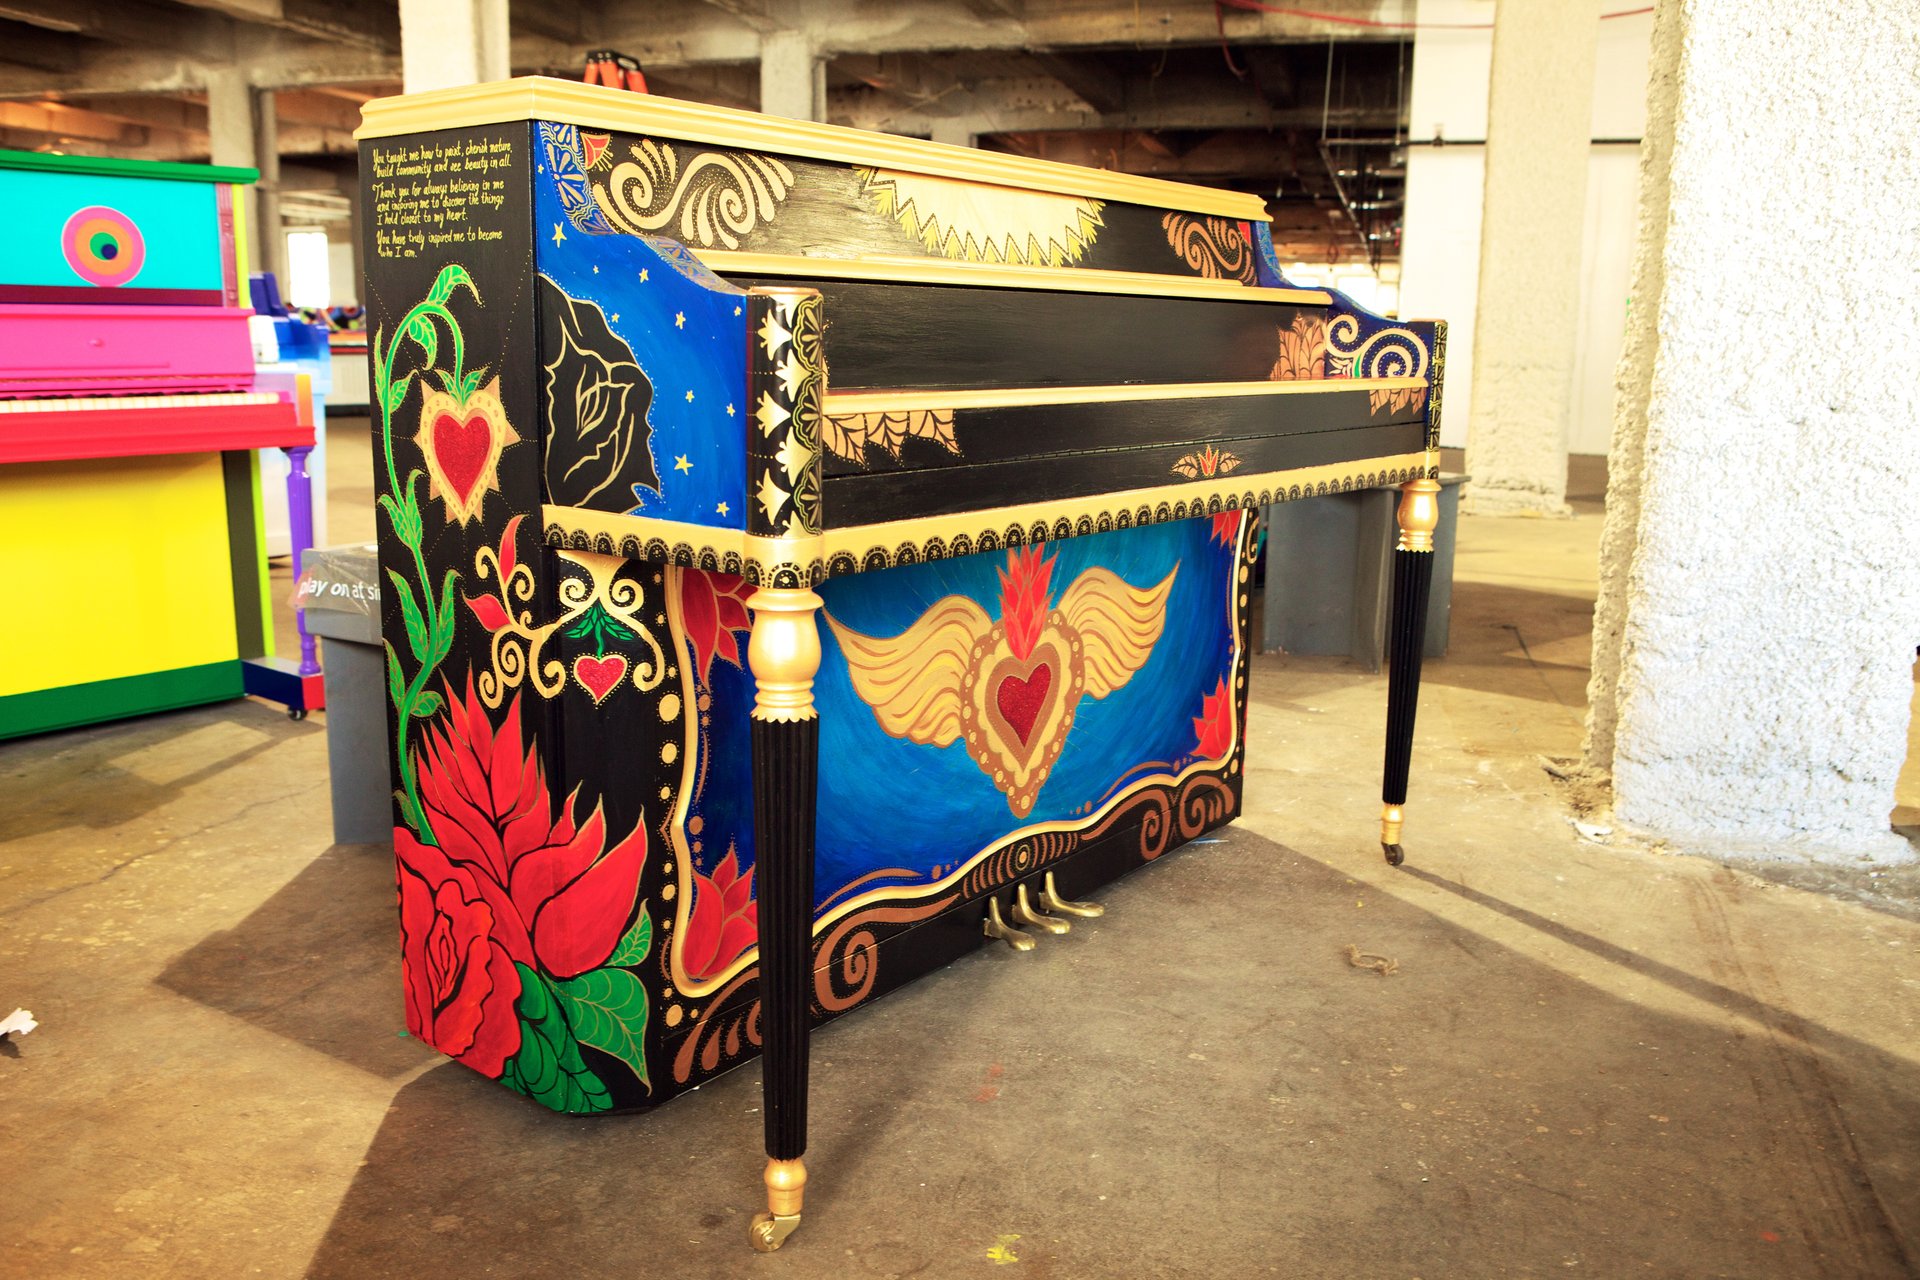  In 2014, Maxine painted a piano for the organization &nbsp;Sing for Hope .&nbsp;Her piano was selected to be displayed in Times Square as part of their NYC public art interactive installation. 